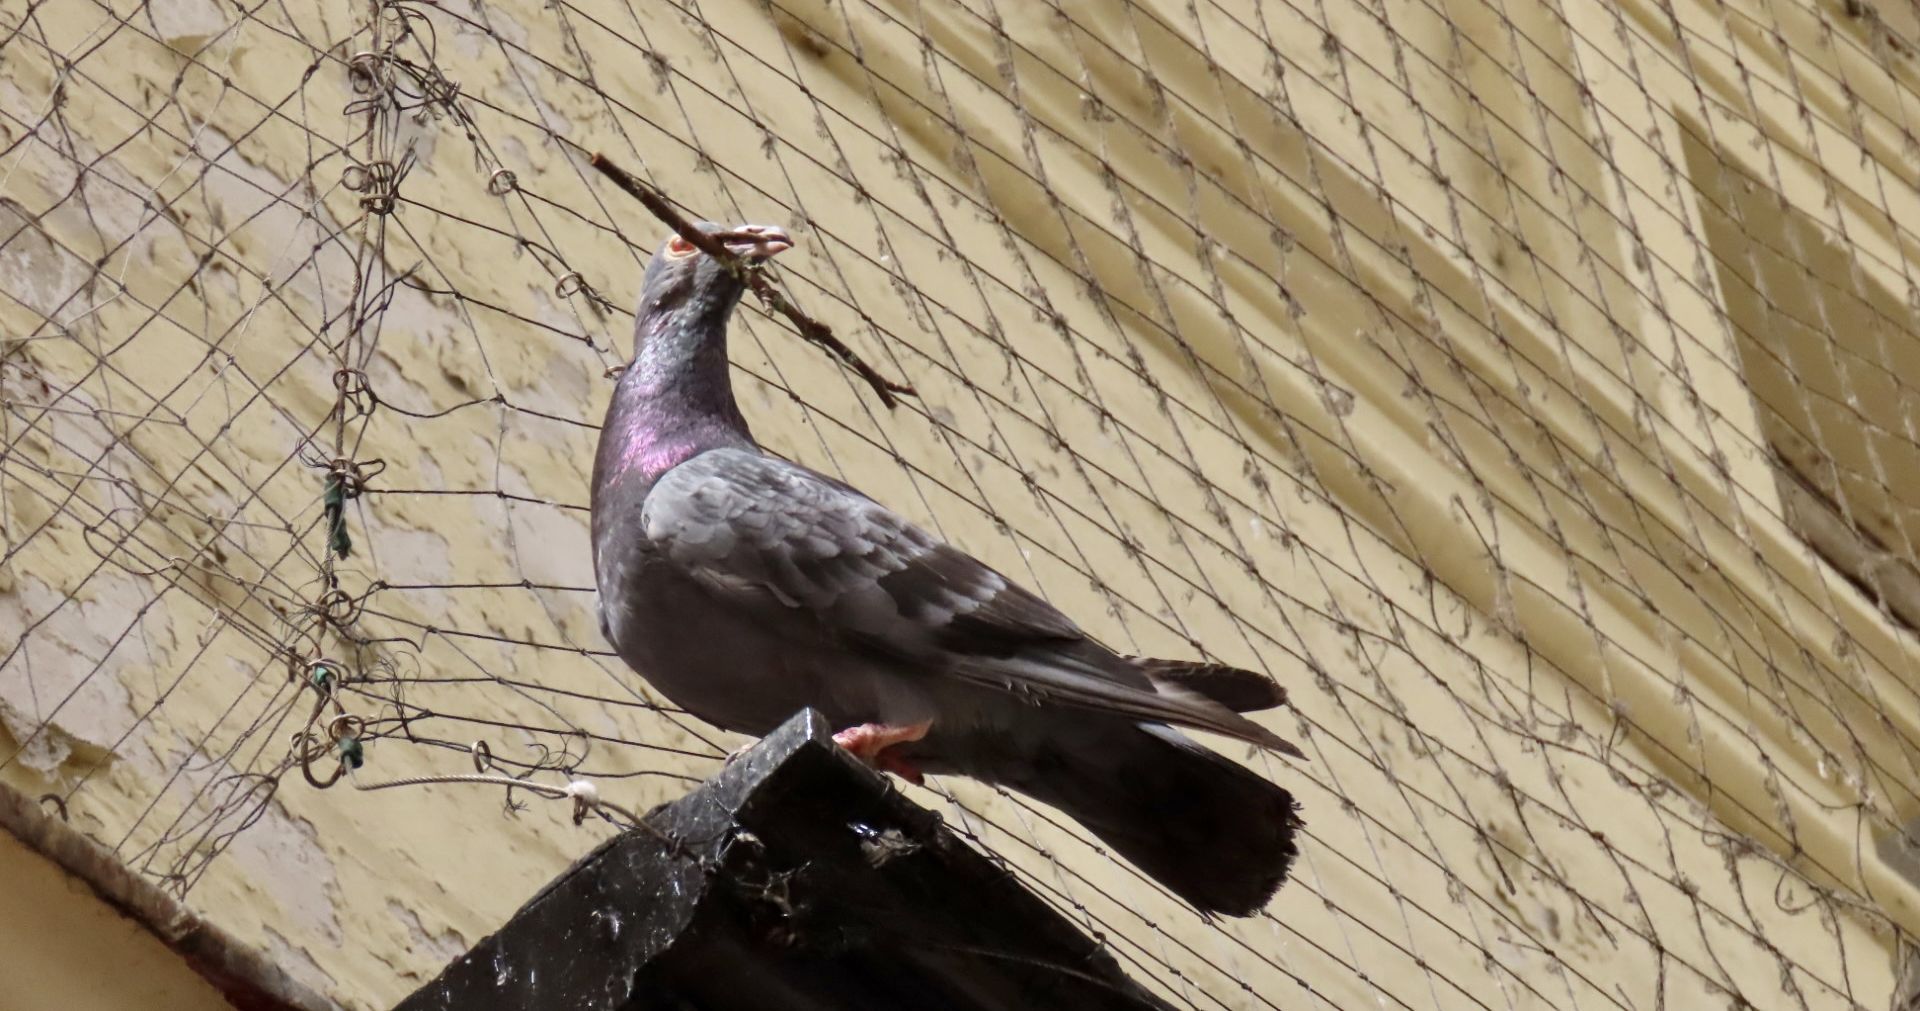 A pigeon in Cambridge Arcade in Southport. Photo by Andrew Brown Stand Up For Southport